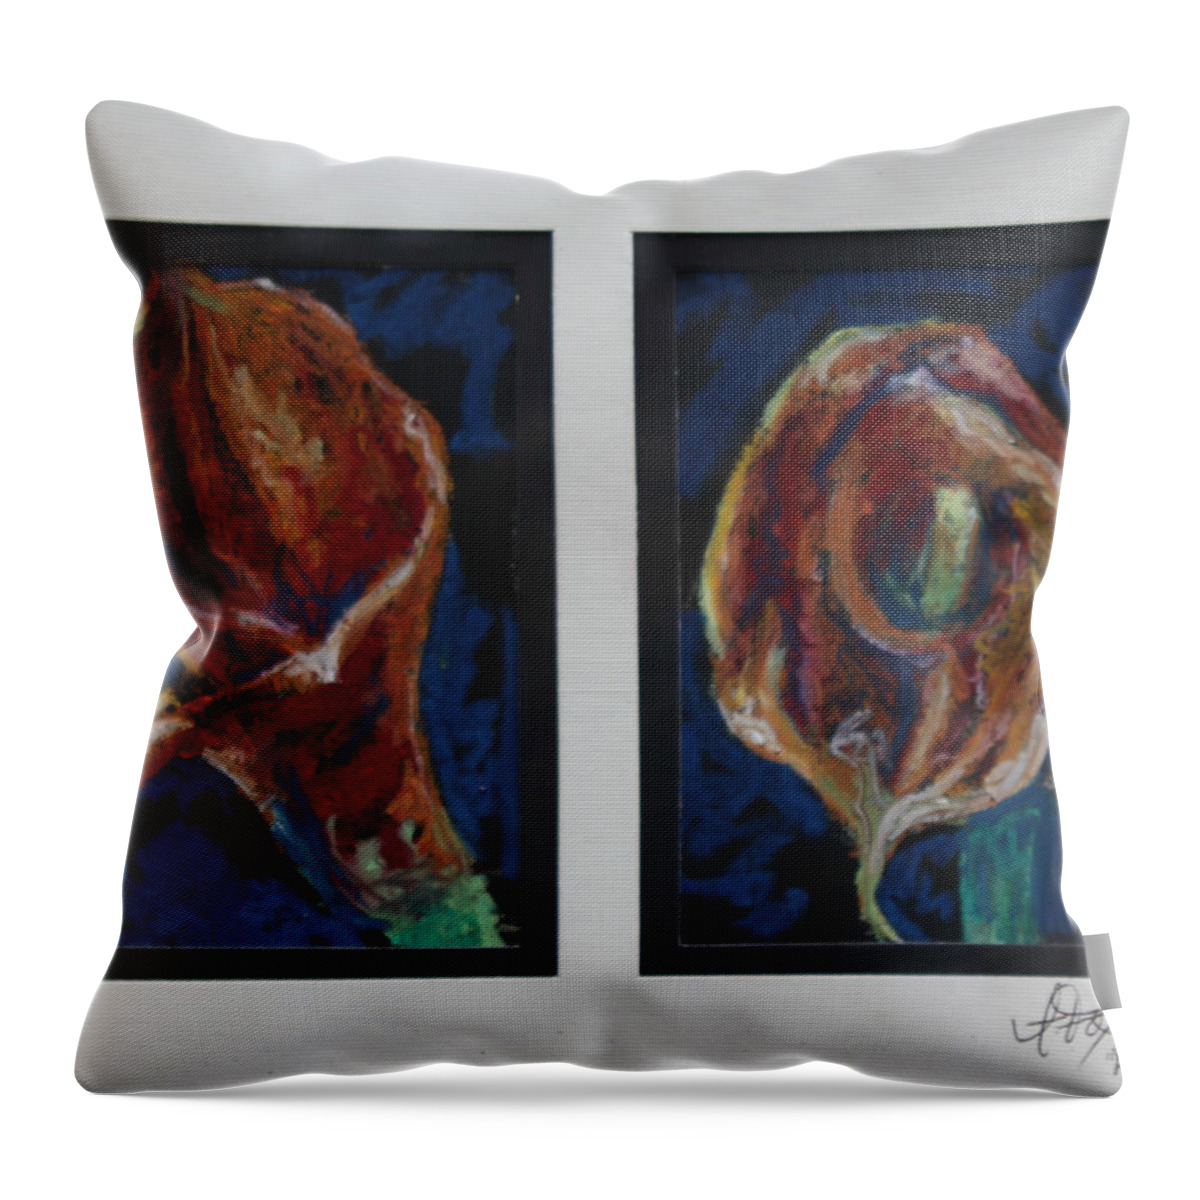 Calla Throw Pillow featuring the drawing Flame Callas by Allison Fox